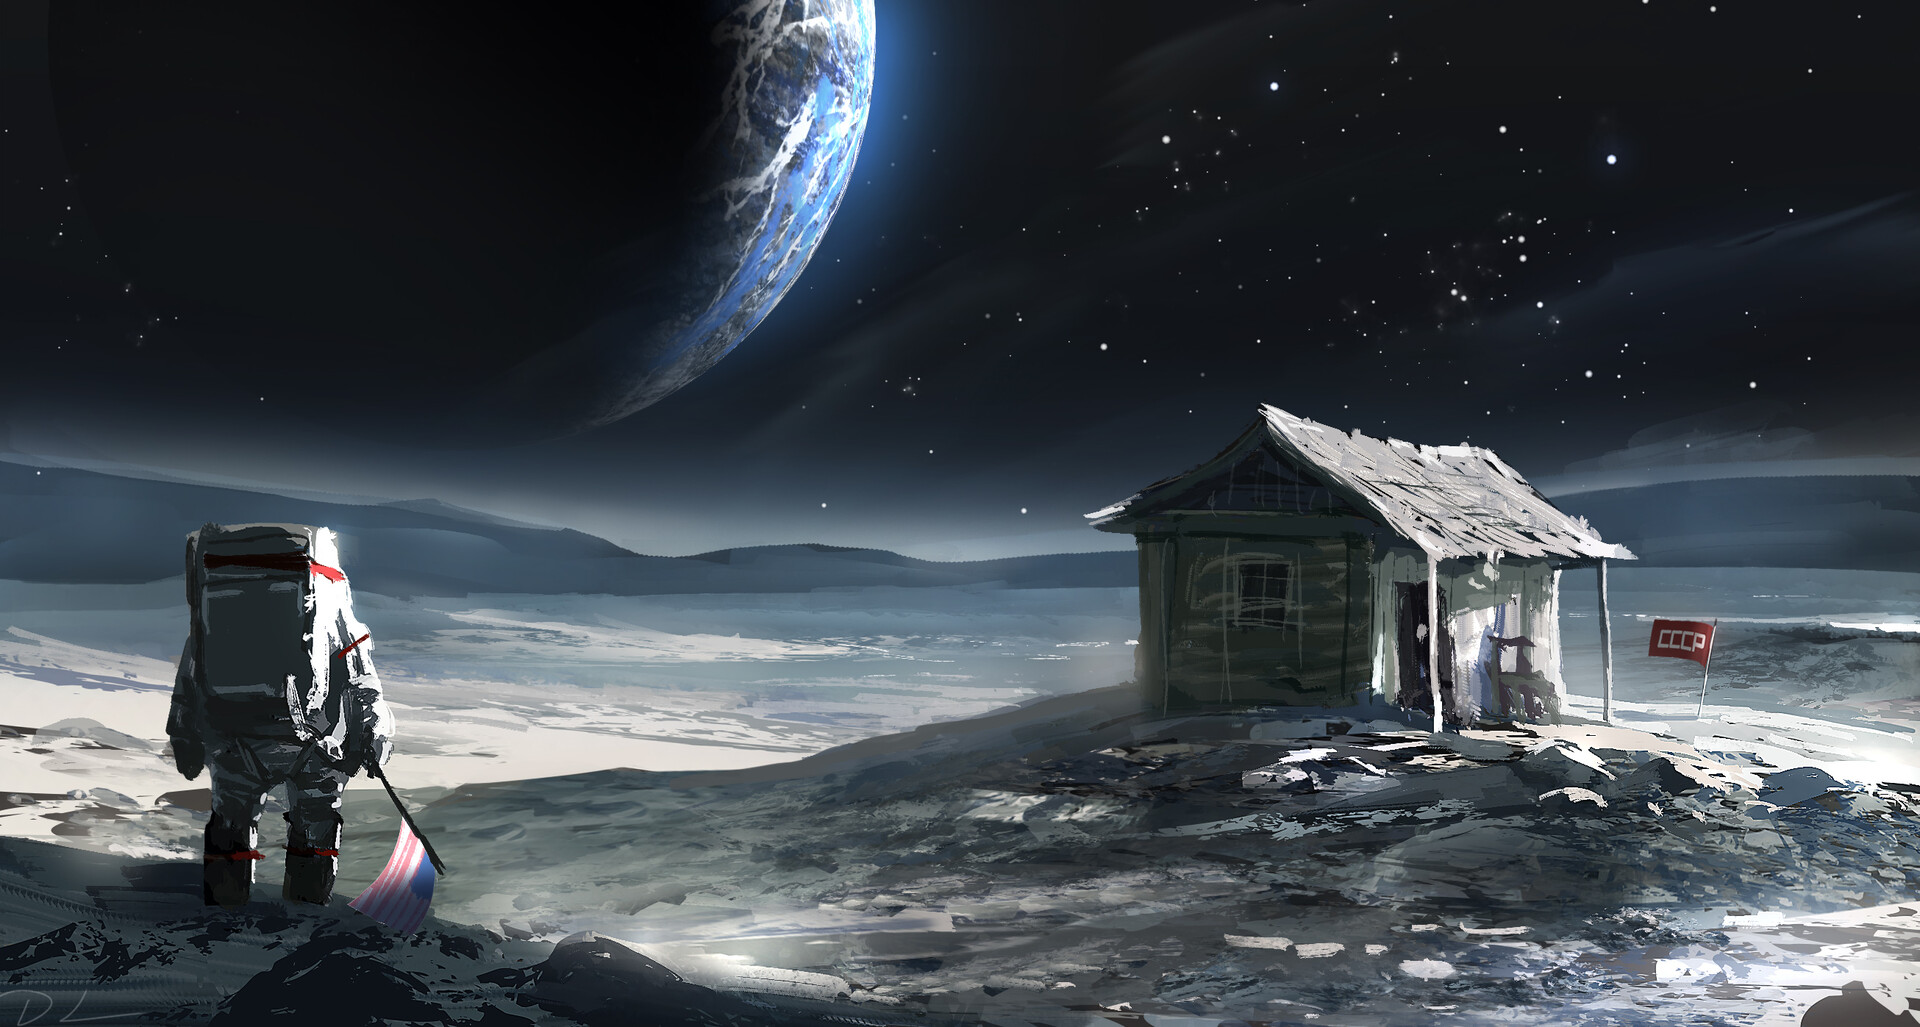 General 1920x1027 artwork science fiction humor space Earth planet USSR cabin